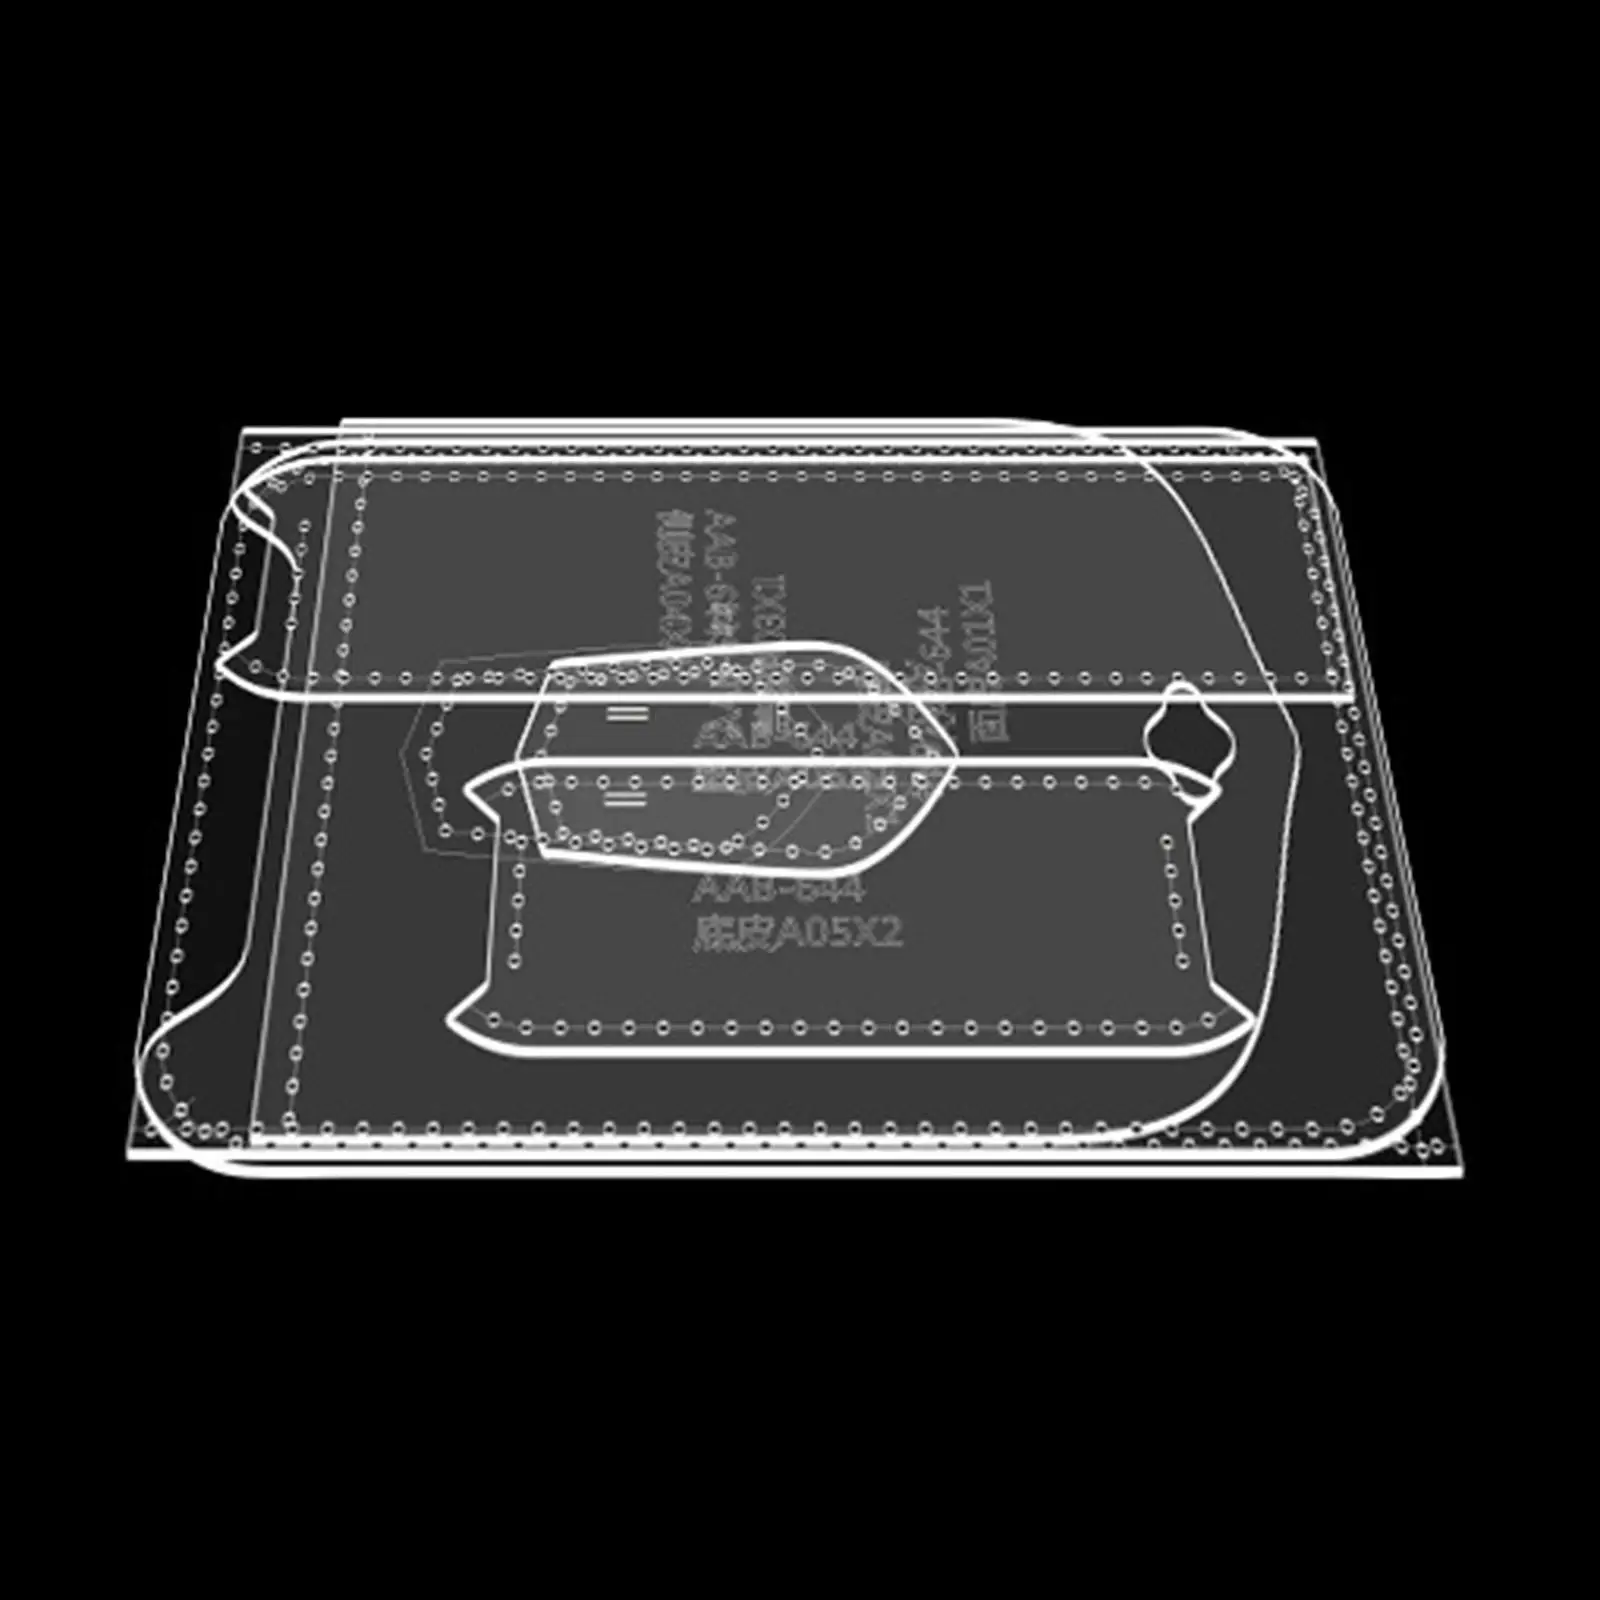 7x Clear Acrylic Template Transparent Leathercraft DIY Tool Leather Craft Purse Making Template DIY Making Tool Wallet Template